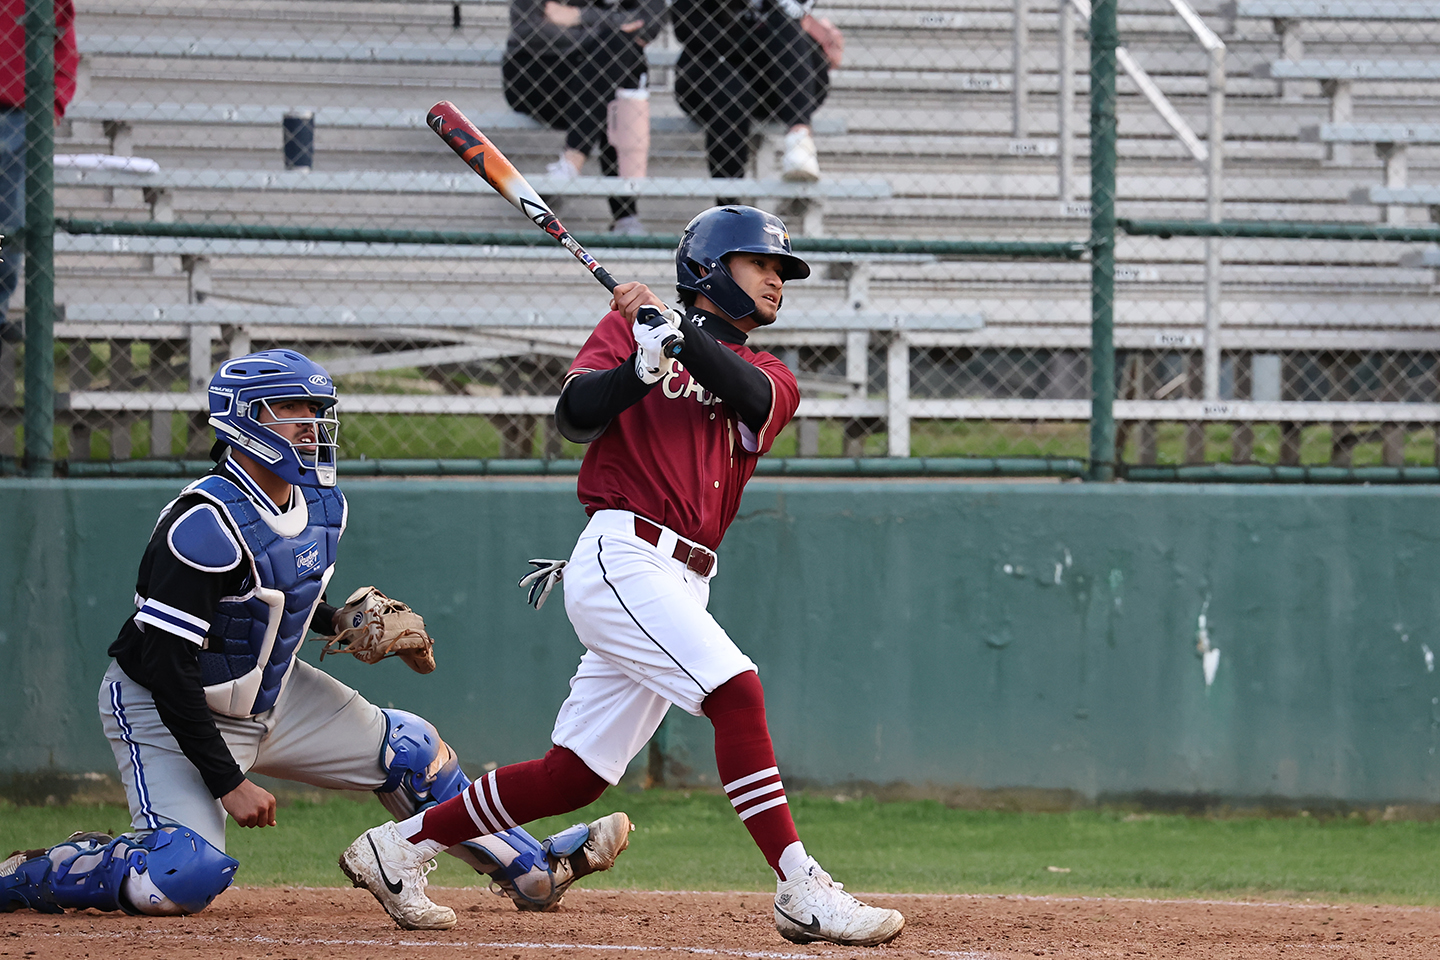 Eagles split doubleheader to set up Sunday rubber match with HTU